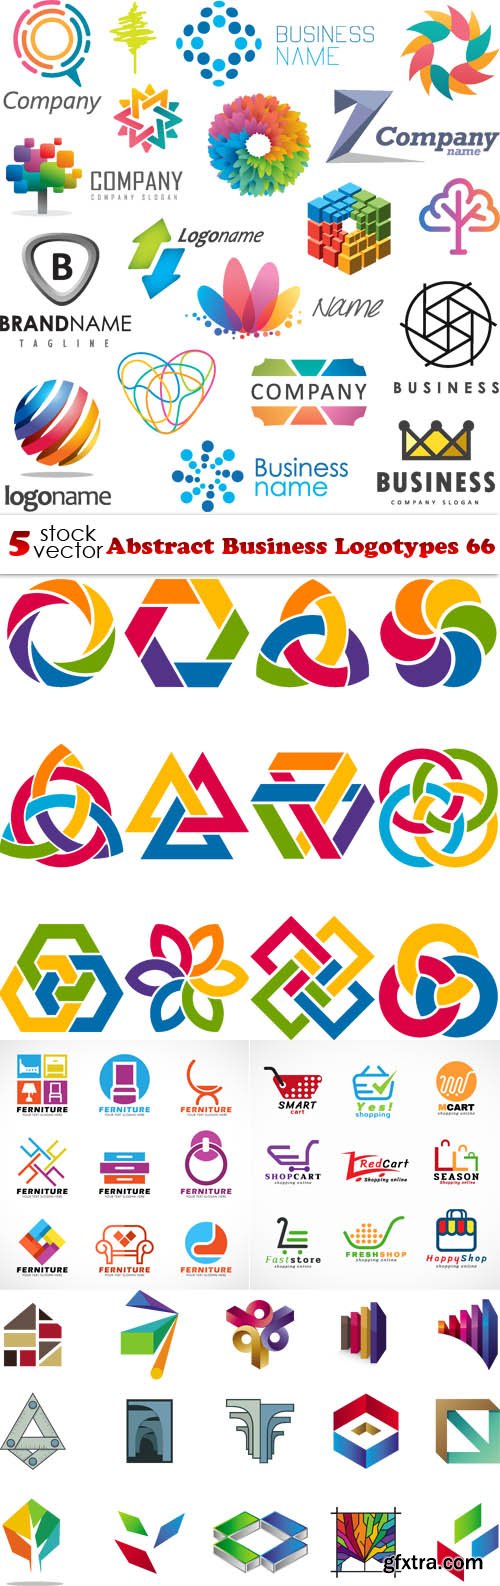 Vectors - Abstract Business Logotypes 66